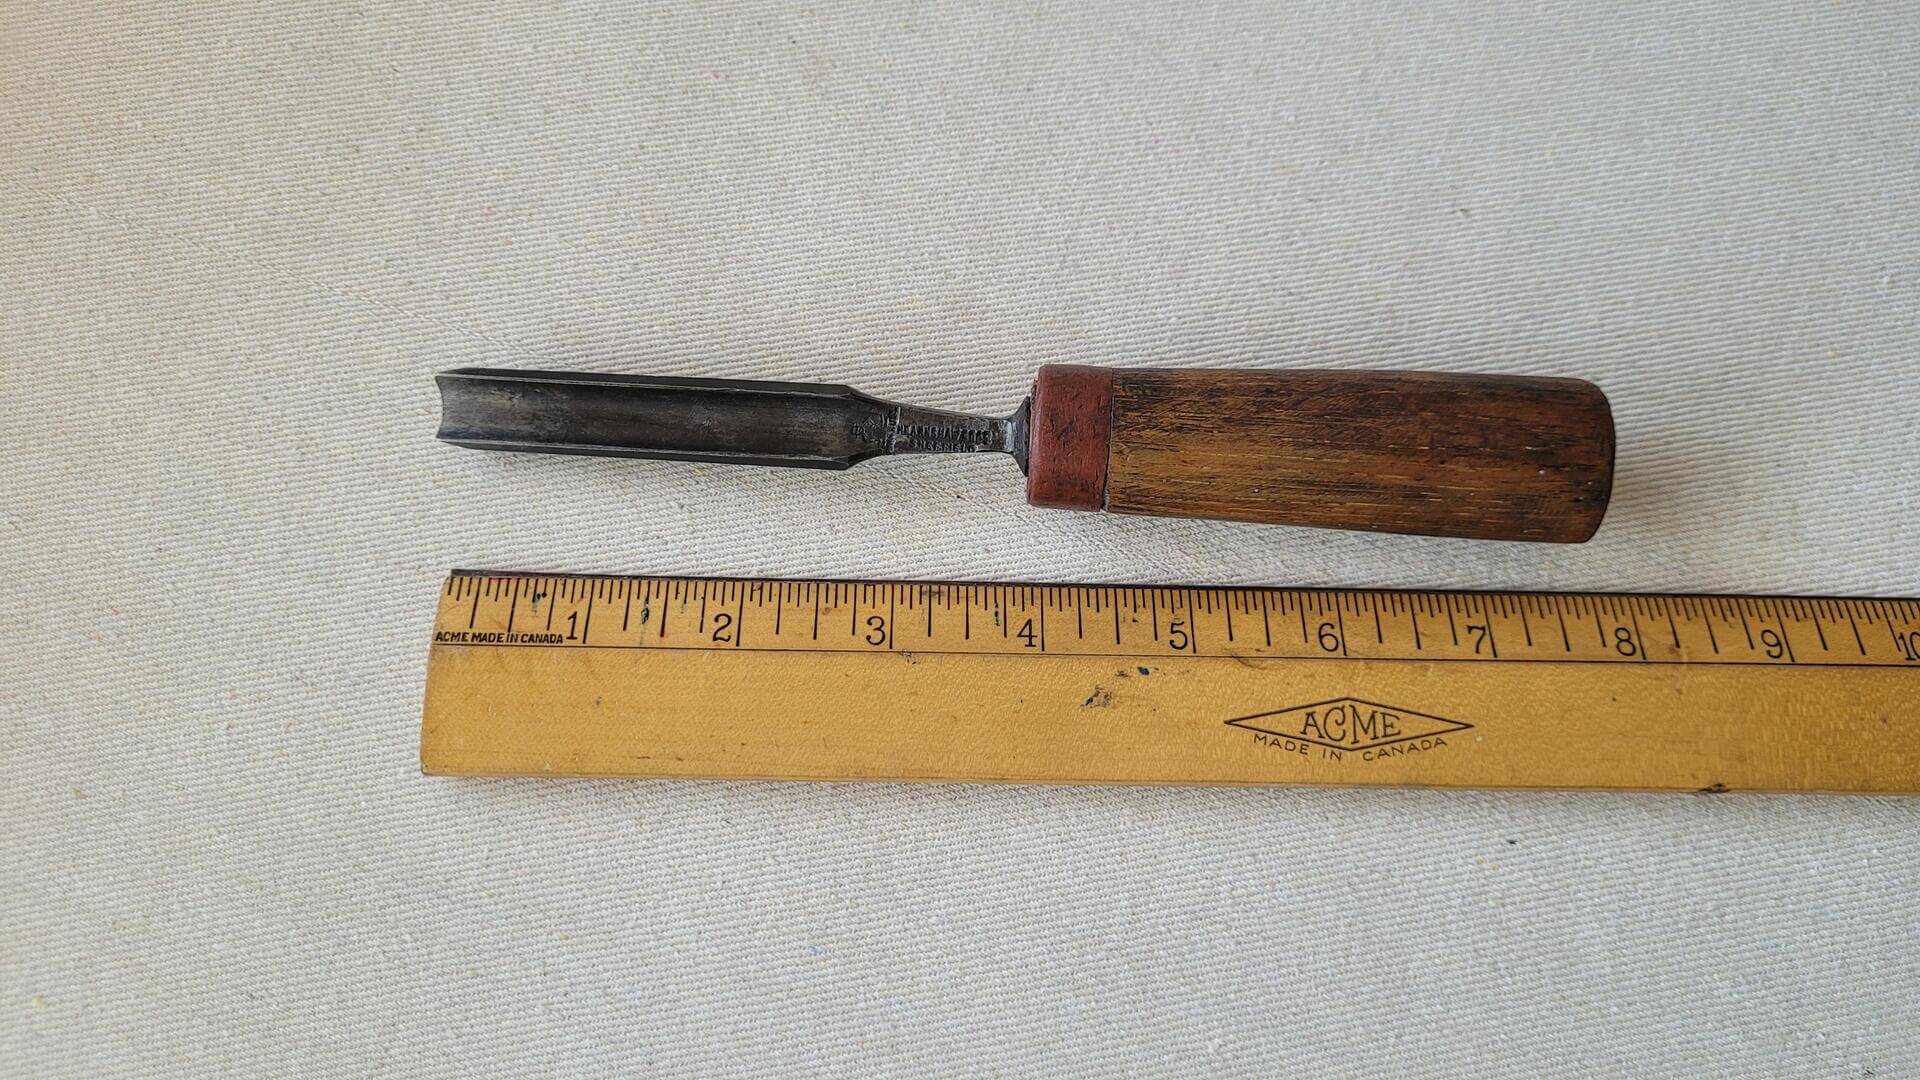 Nice vintage Hearnshaw Bros 1/2" pairing gouge chisel. Rare antique made in Sheffield England collectible carpentry and woodworking wood carving hand tool